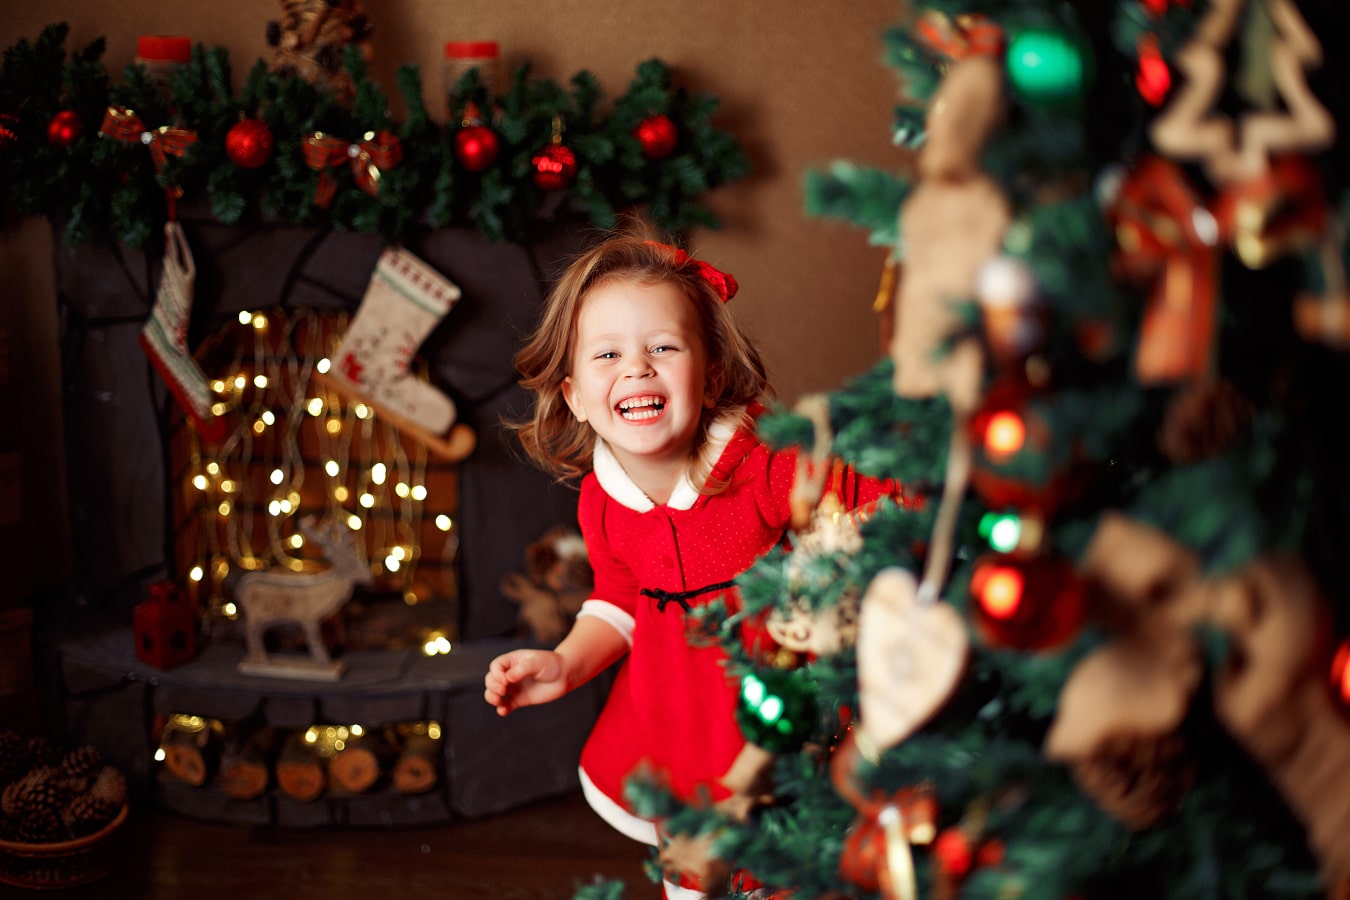 A happy girl in a red dress peeking out from behind a Christmas tree, laughing, happy